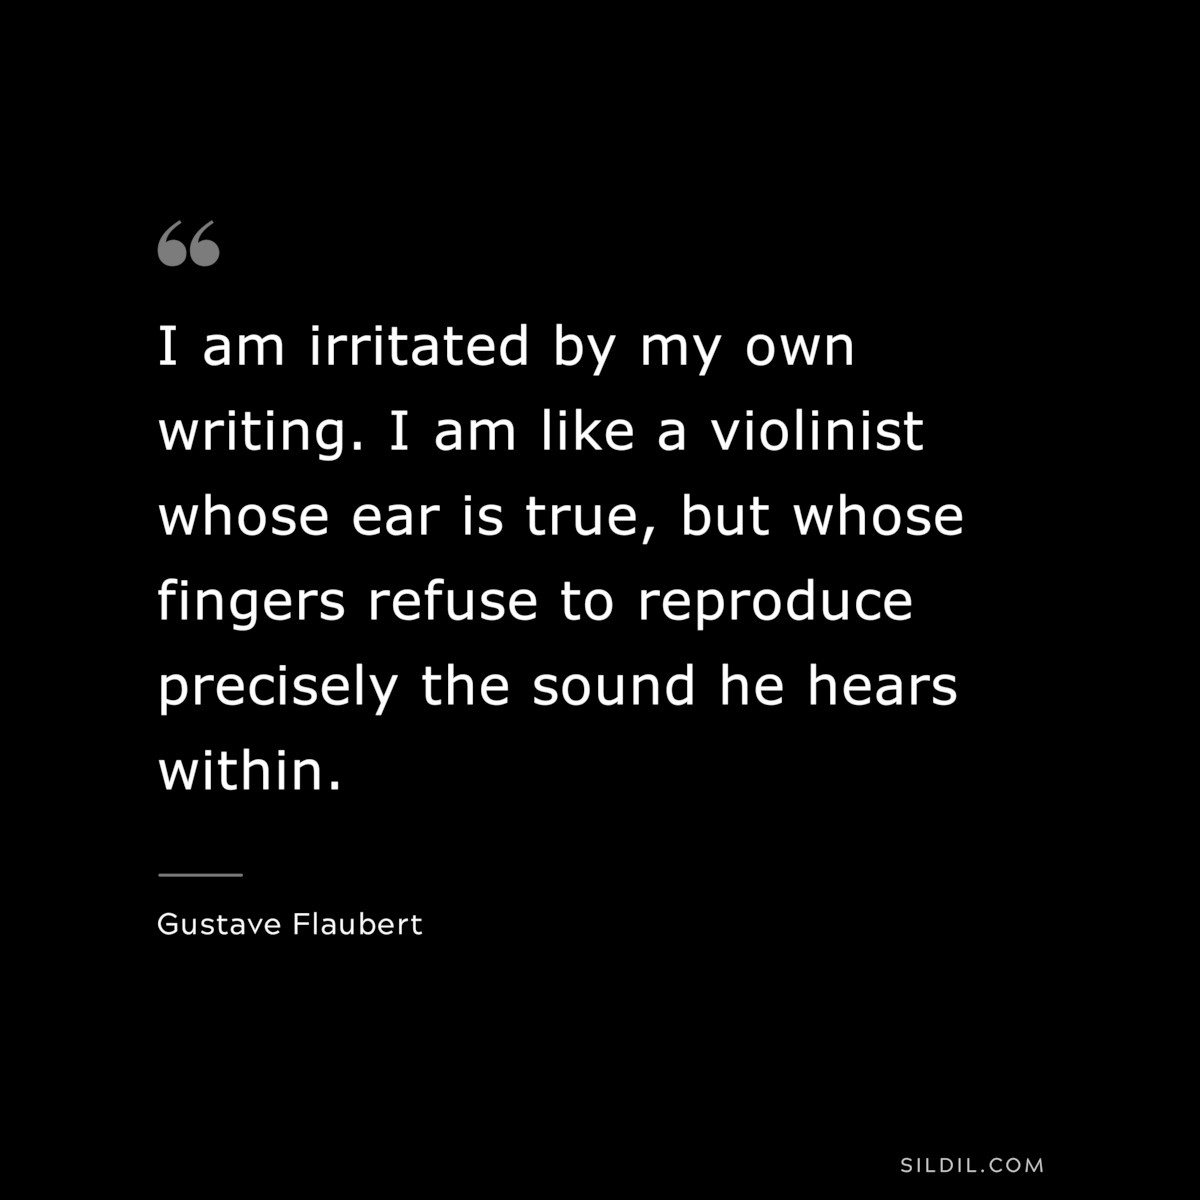 I am irritated by my own writing. I am like a violinist whose ear is true, but whose fingers refuse to reproduce precisely the sound he hears within. ― Gustave Flaubert